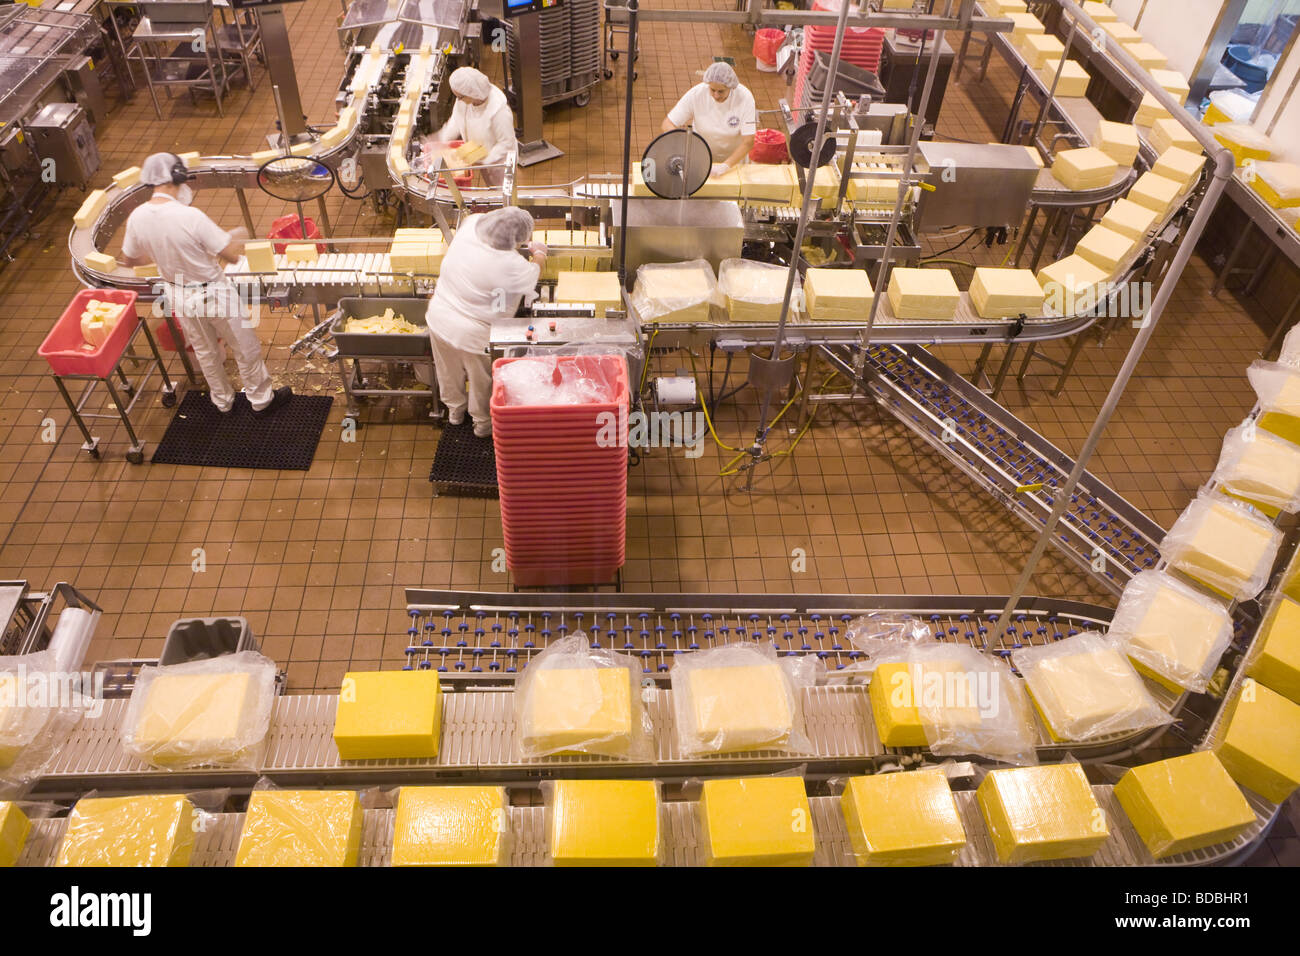 Women on the production line making cheddar cheese at Tillamook Cheese factory in Tillamook Oregon Stock Photo